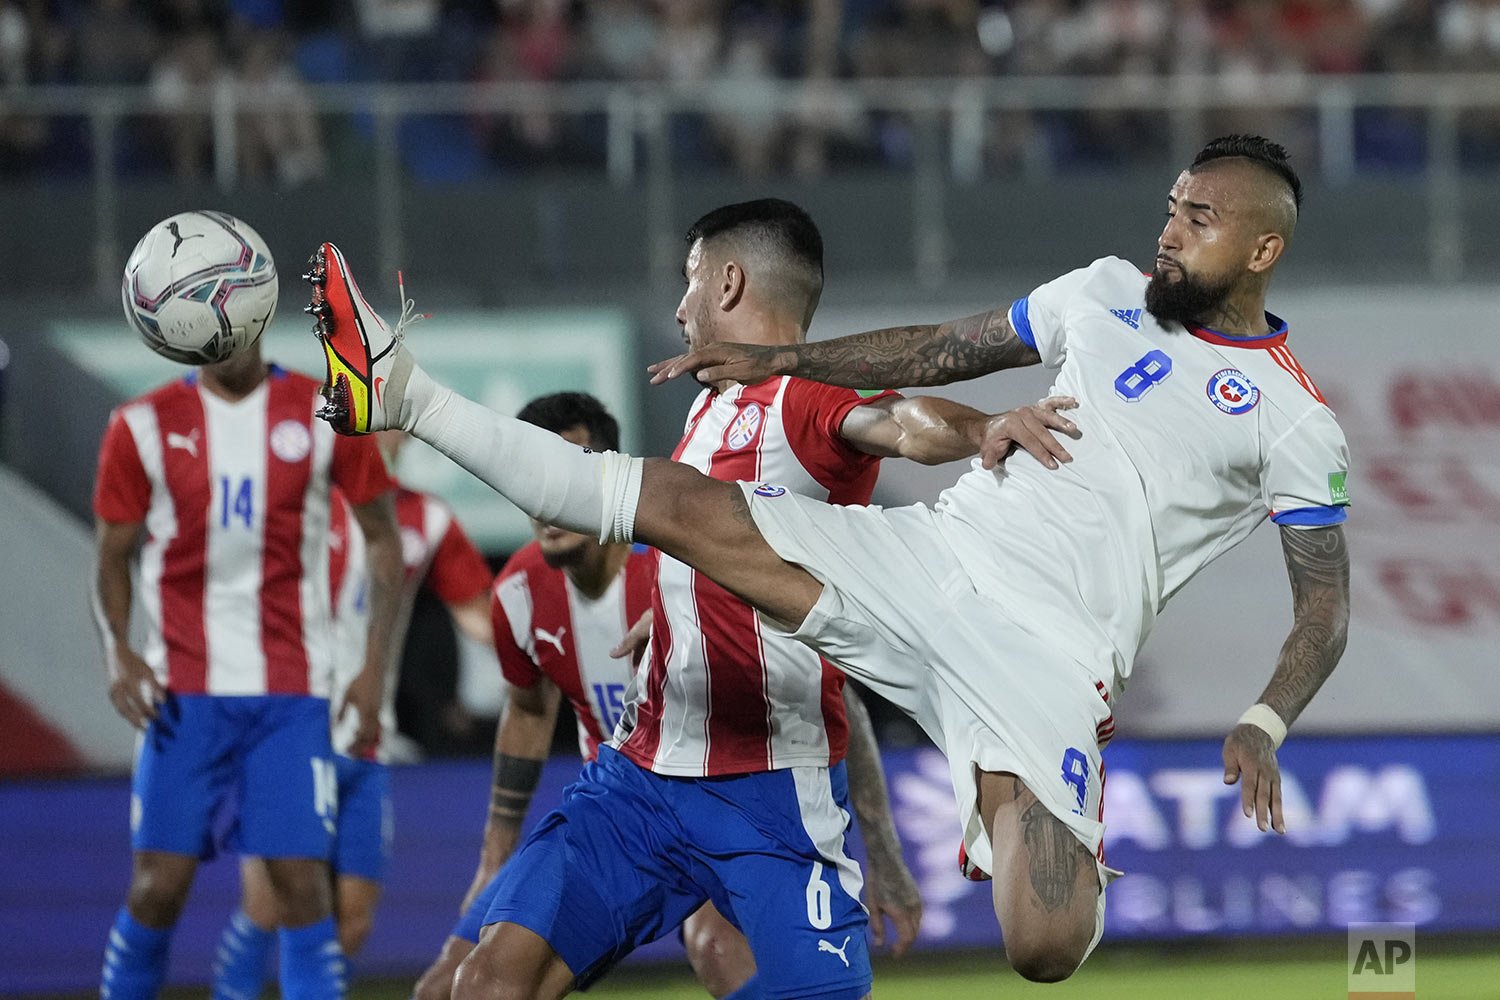  Chile's Arturo Vidal, right, and Paraguay's Junior Alonso, battle for control of the ball during a qualifying soccer match for the FIFA World Cup Qatar 2022, in Asuncion, Paraguay, Nov. 11, 2021. (AP Photo/Jorge Saenz) 